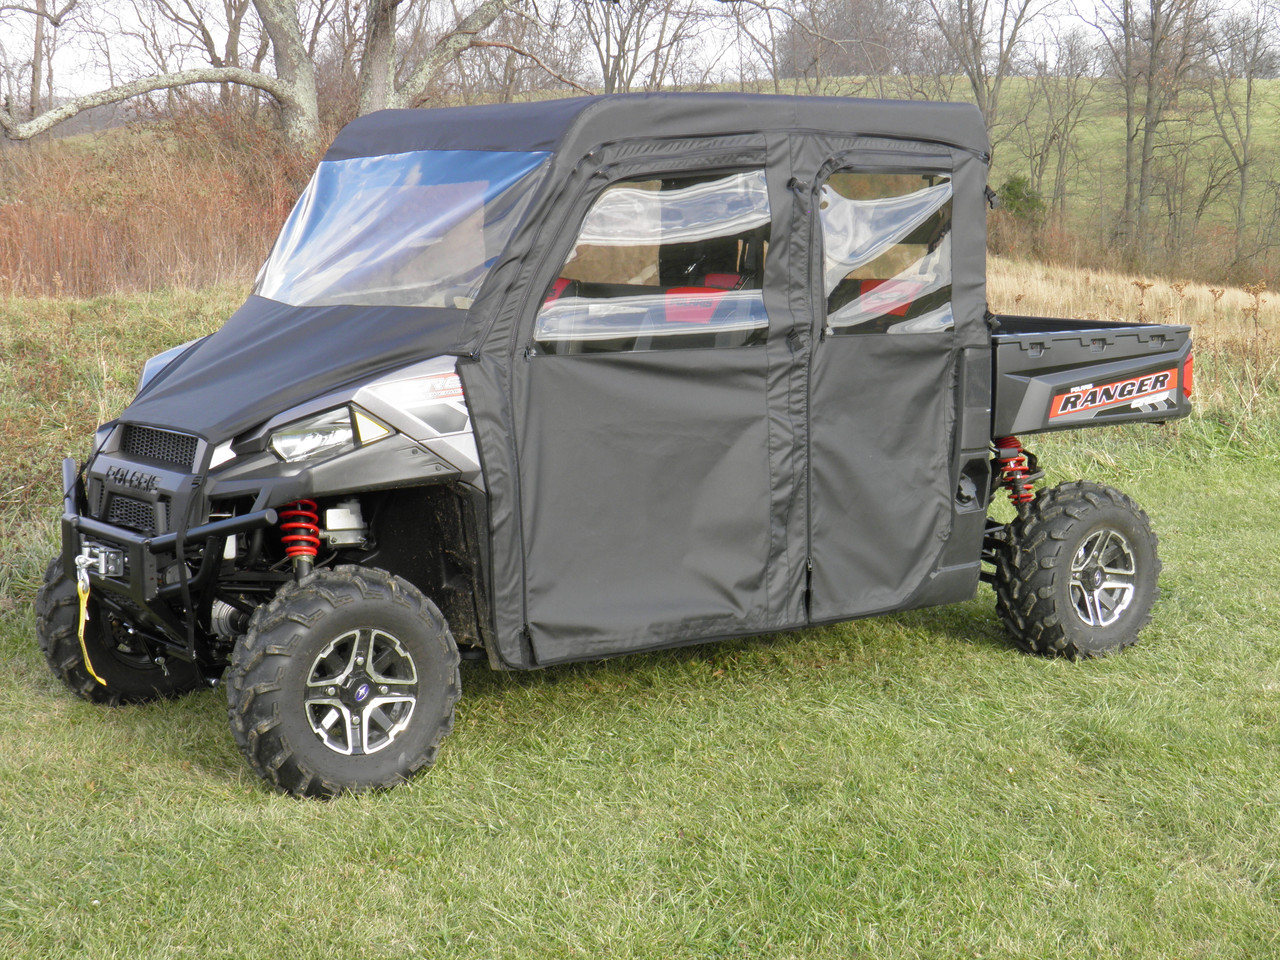 3 Star side x side Polaris Ranger Crew 1000/XP1000 full cab enclosure with vinyl windshield side angle view